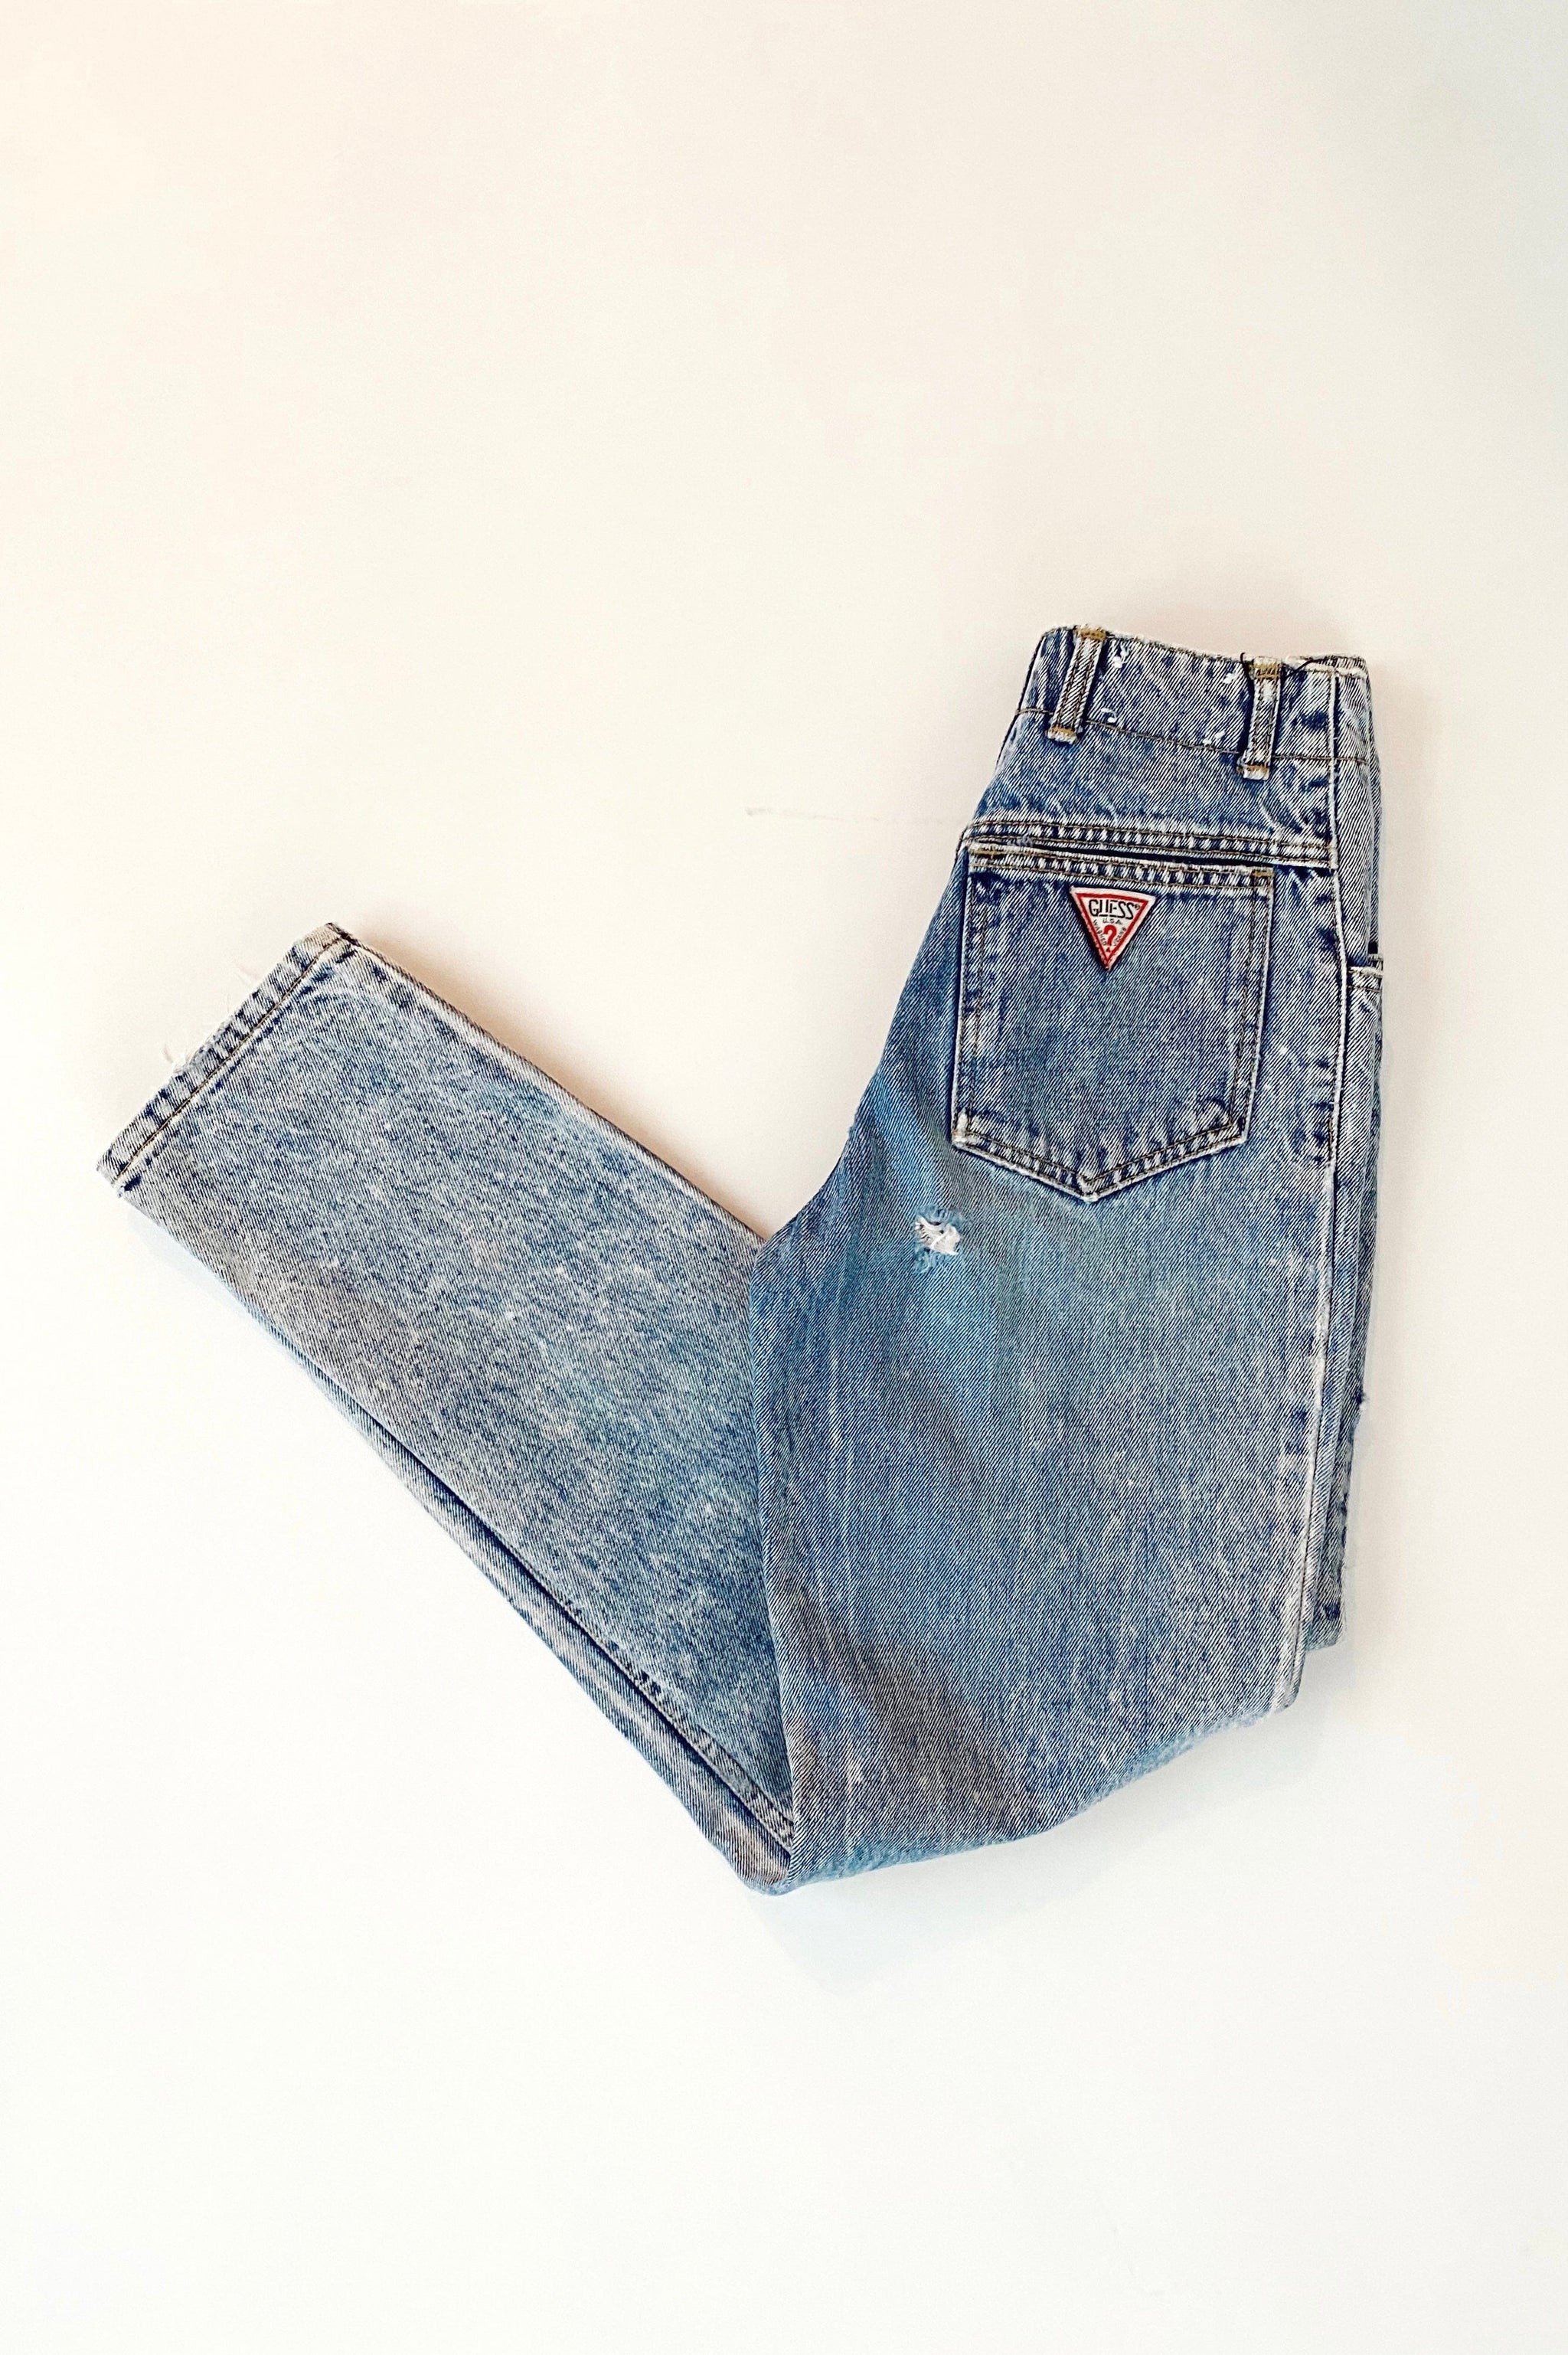 haar Kameraad Trots 80s Vintage Guess by Georges Marciano High Waist Jeans / Size 26 - COUTONIC